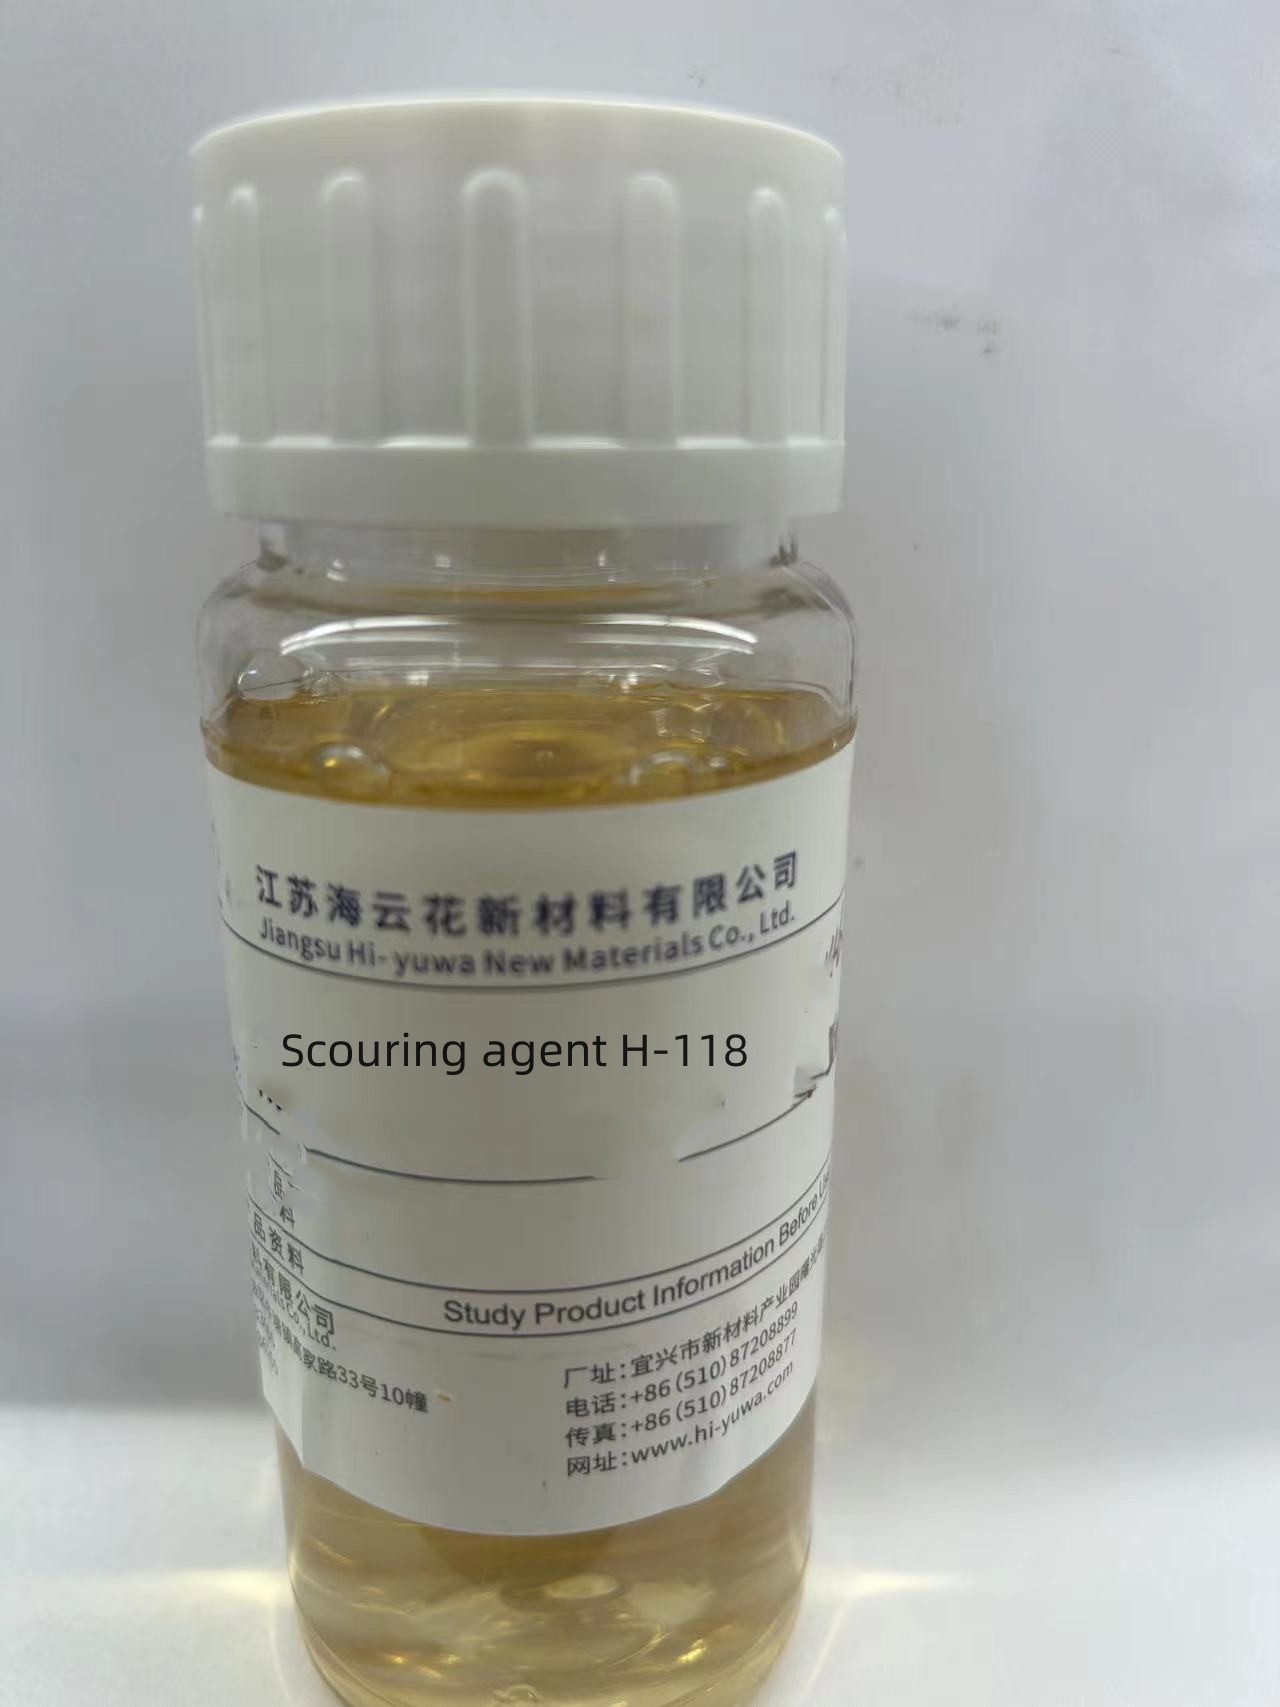 Scouring agent H-118